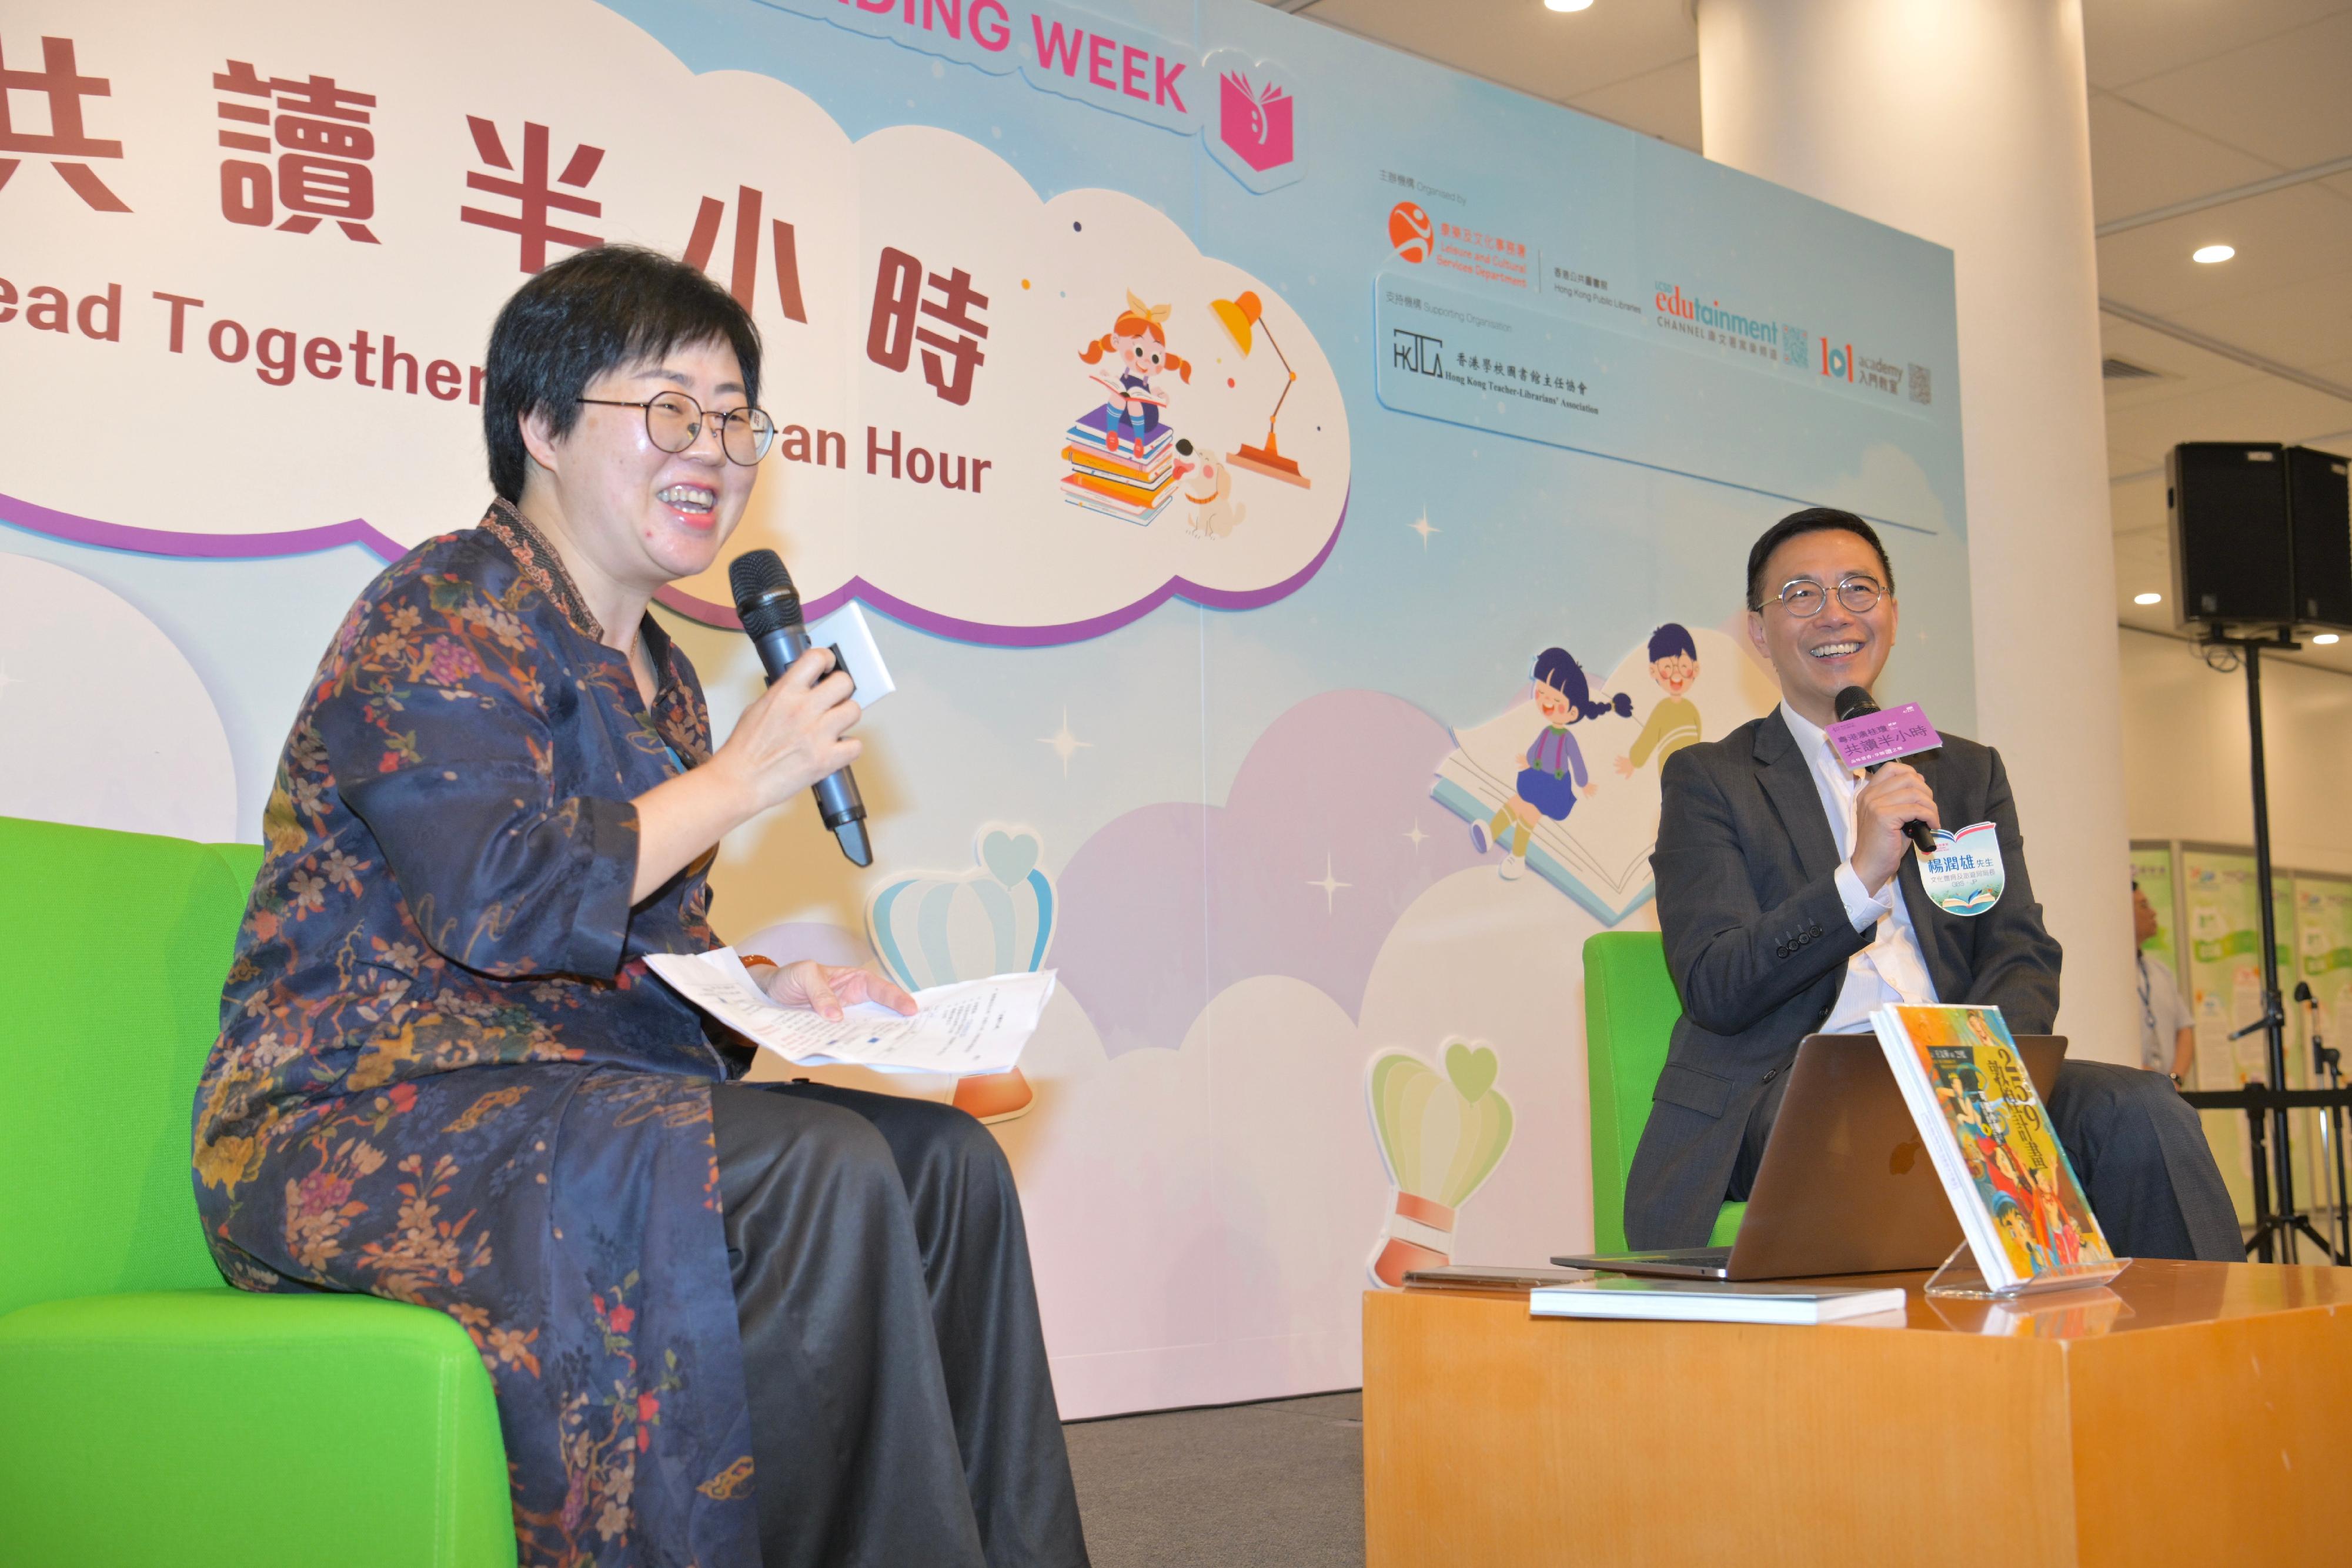 The Hong Kong Public Libraries of the Leisure and Cultural Services Department (LCSD) today (April 23) held "Read Together for Half an Hour" activities at the Hong Kong Central Library (HKCL) and various LCSD venues on the first Hong Kong Reading for All Day. Photo shows the Secretary for Culture, Sports and Tourism, Mr Kevin Yeung (right), participating in the "Read Together for Half an Hour" activity at the Exhibition Gallery of the HKCL.